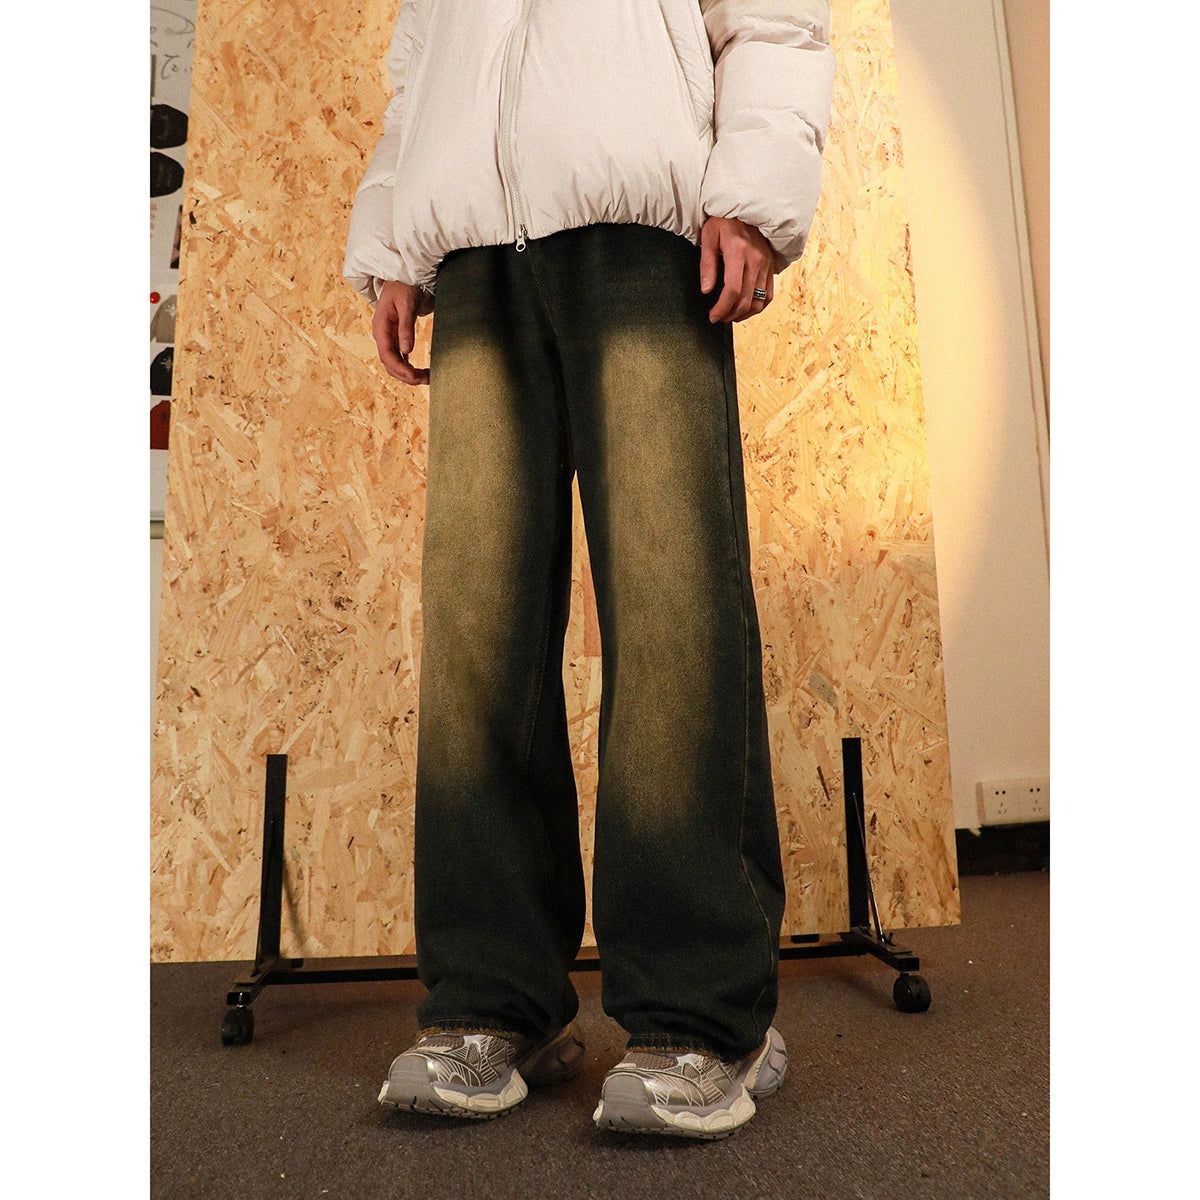 Stone Washed Straight Leg Jeans Korean Street Fashion Jeans By Mr Nearly Shop Online at OH Vault